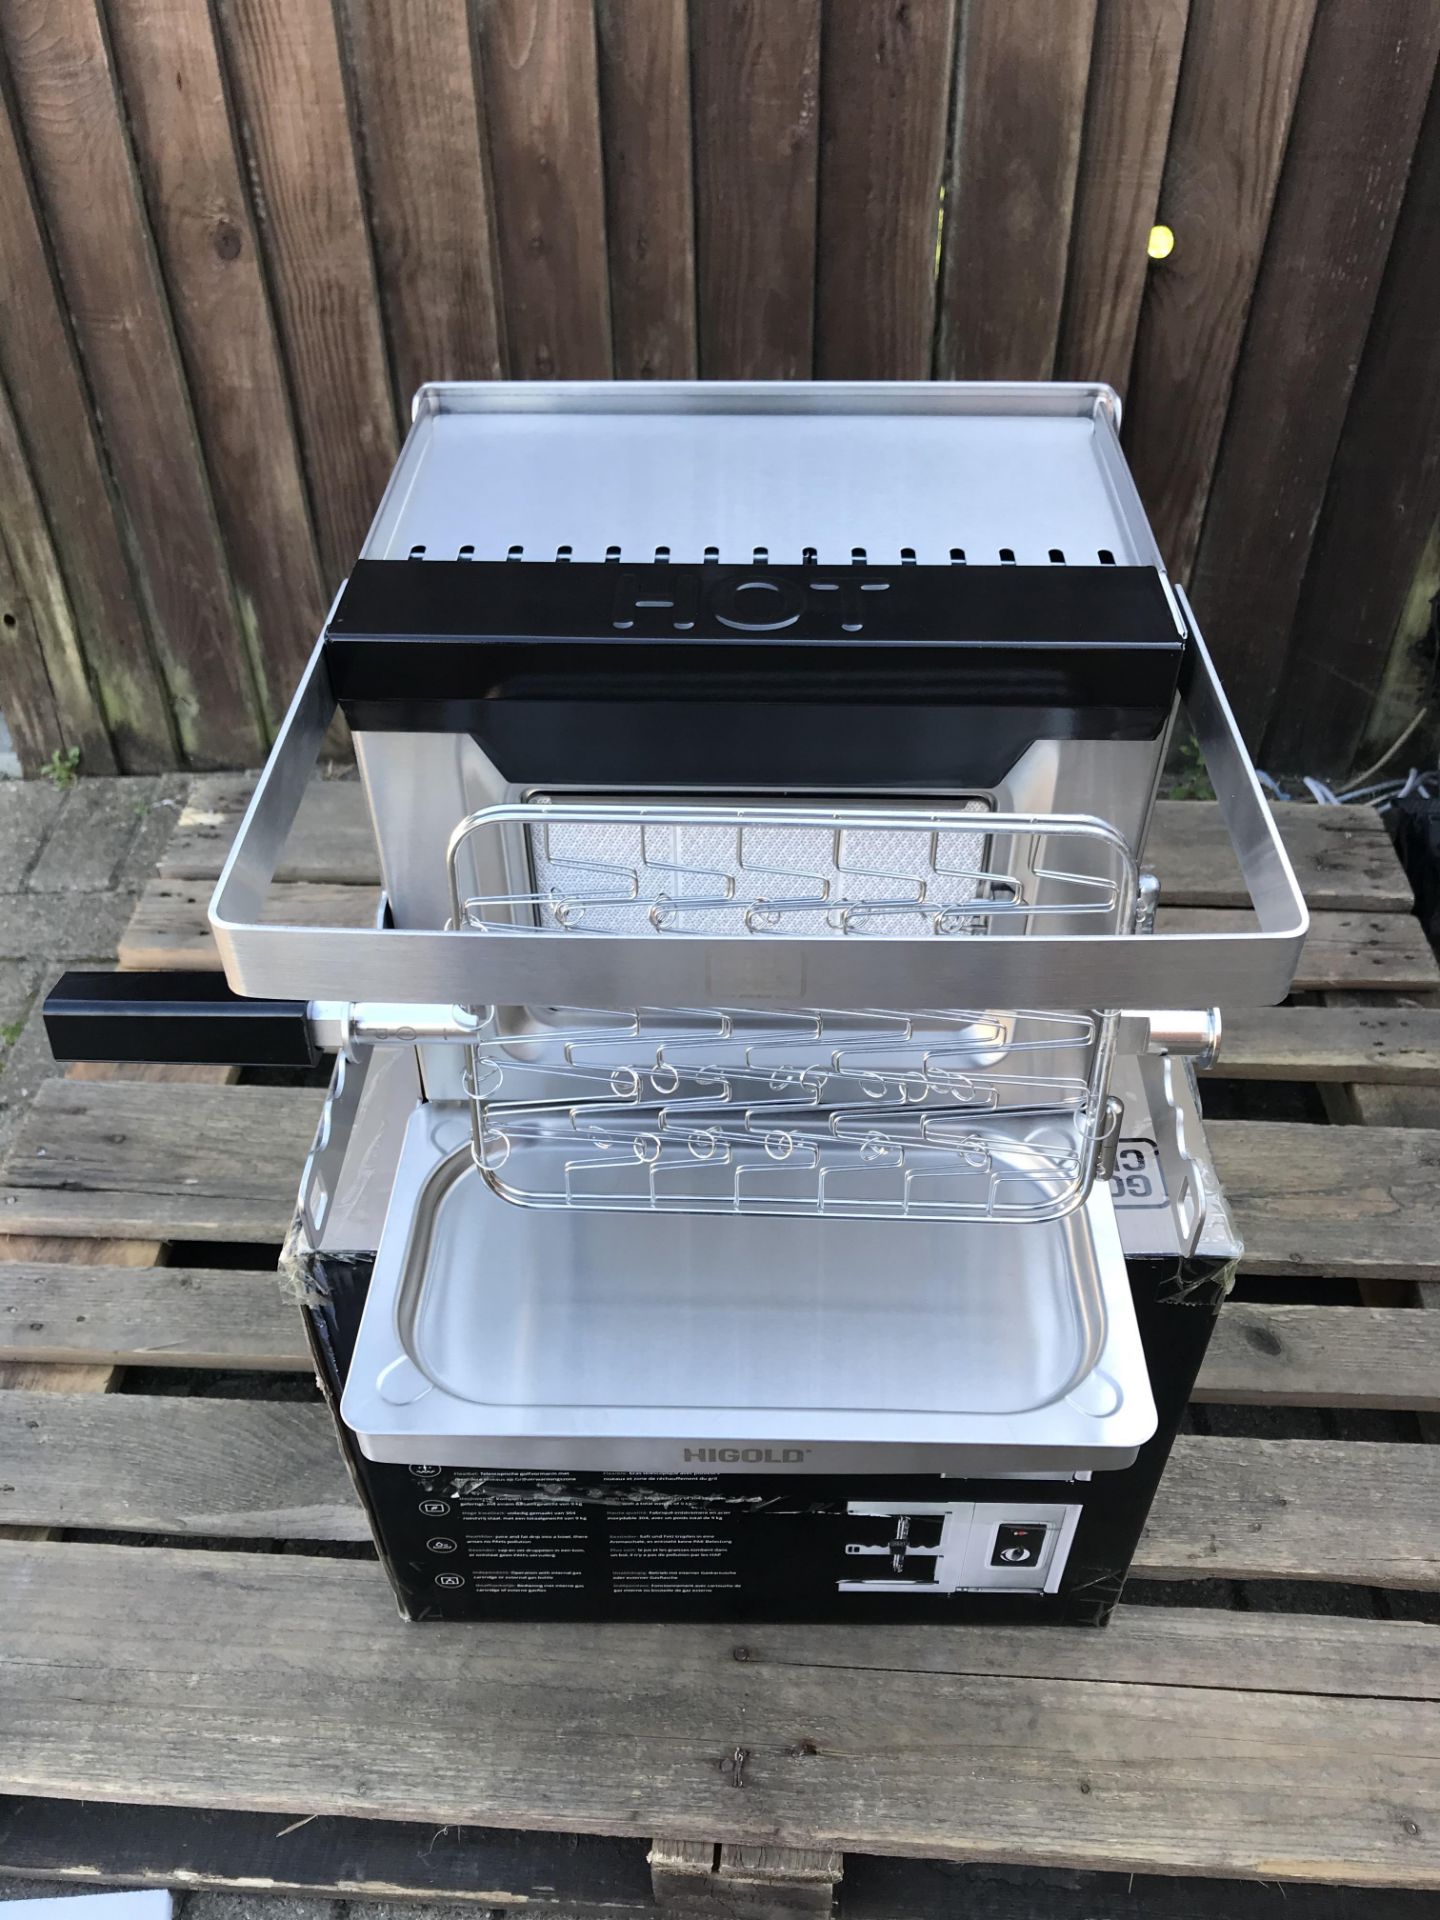 GOLD CHEF TWO 800C ROTISSERIE GRILL - Image 2 of 6